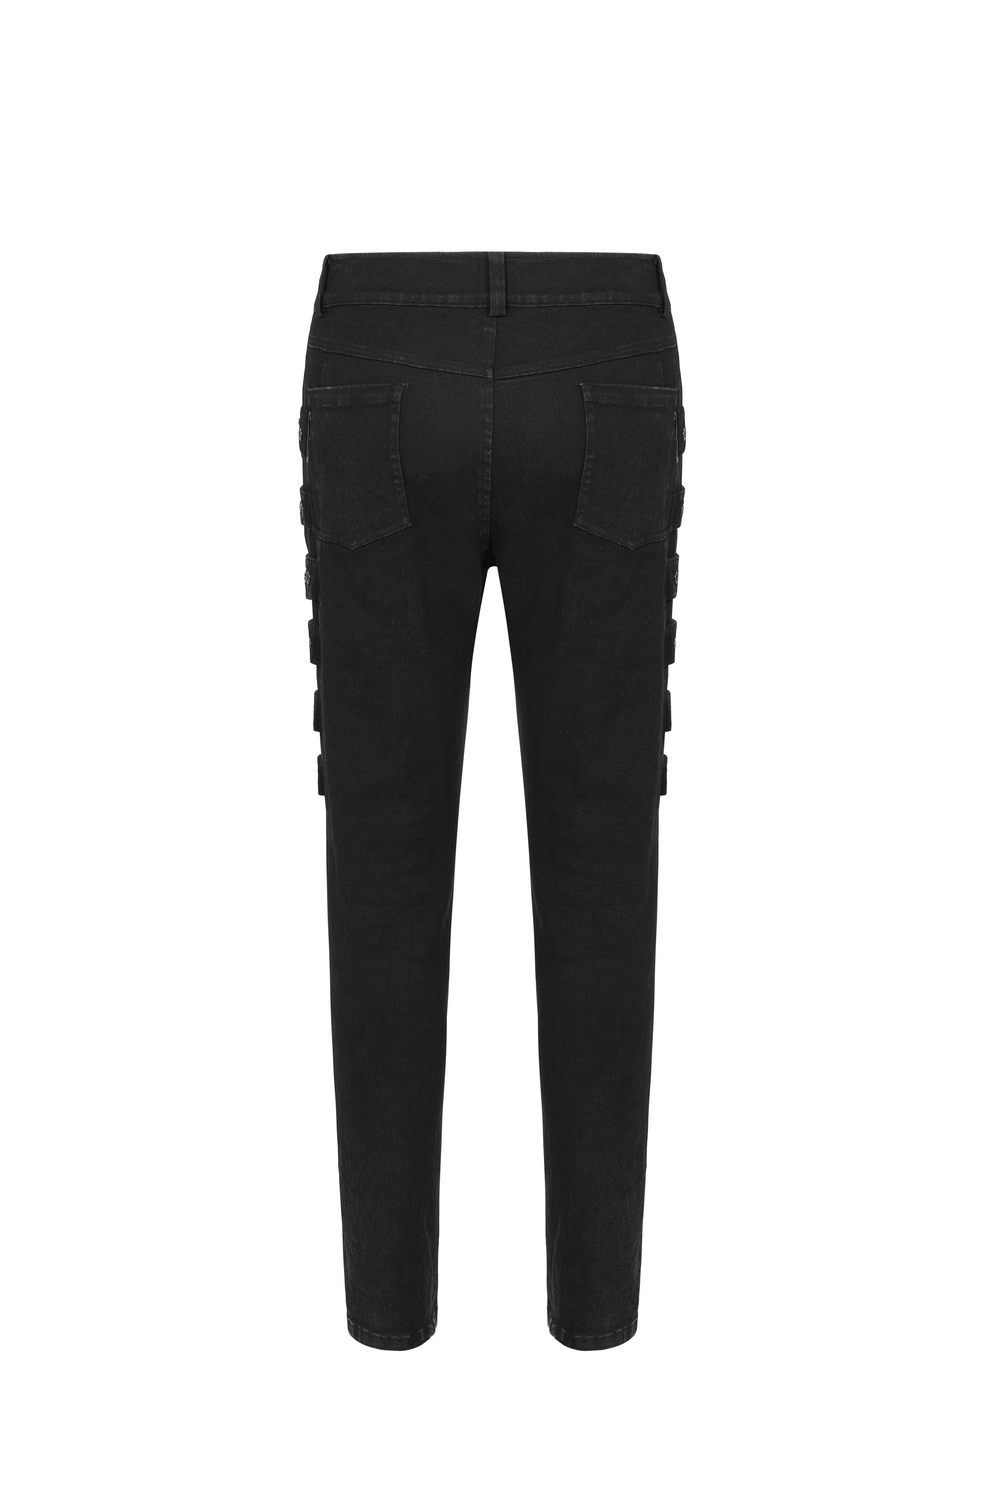 Urban Black Strap-Detailed Cargo Trousers Fit